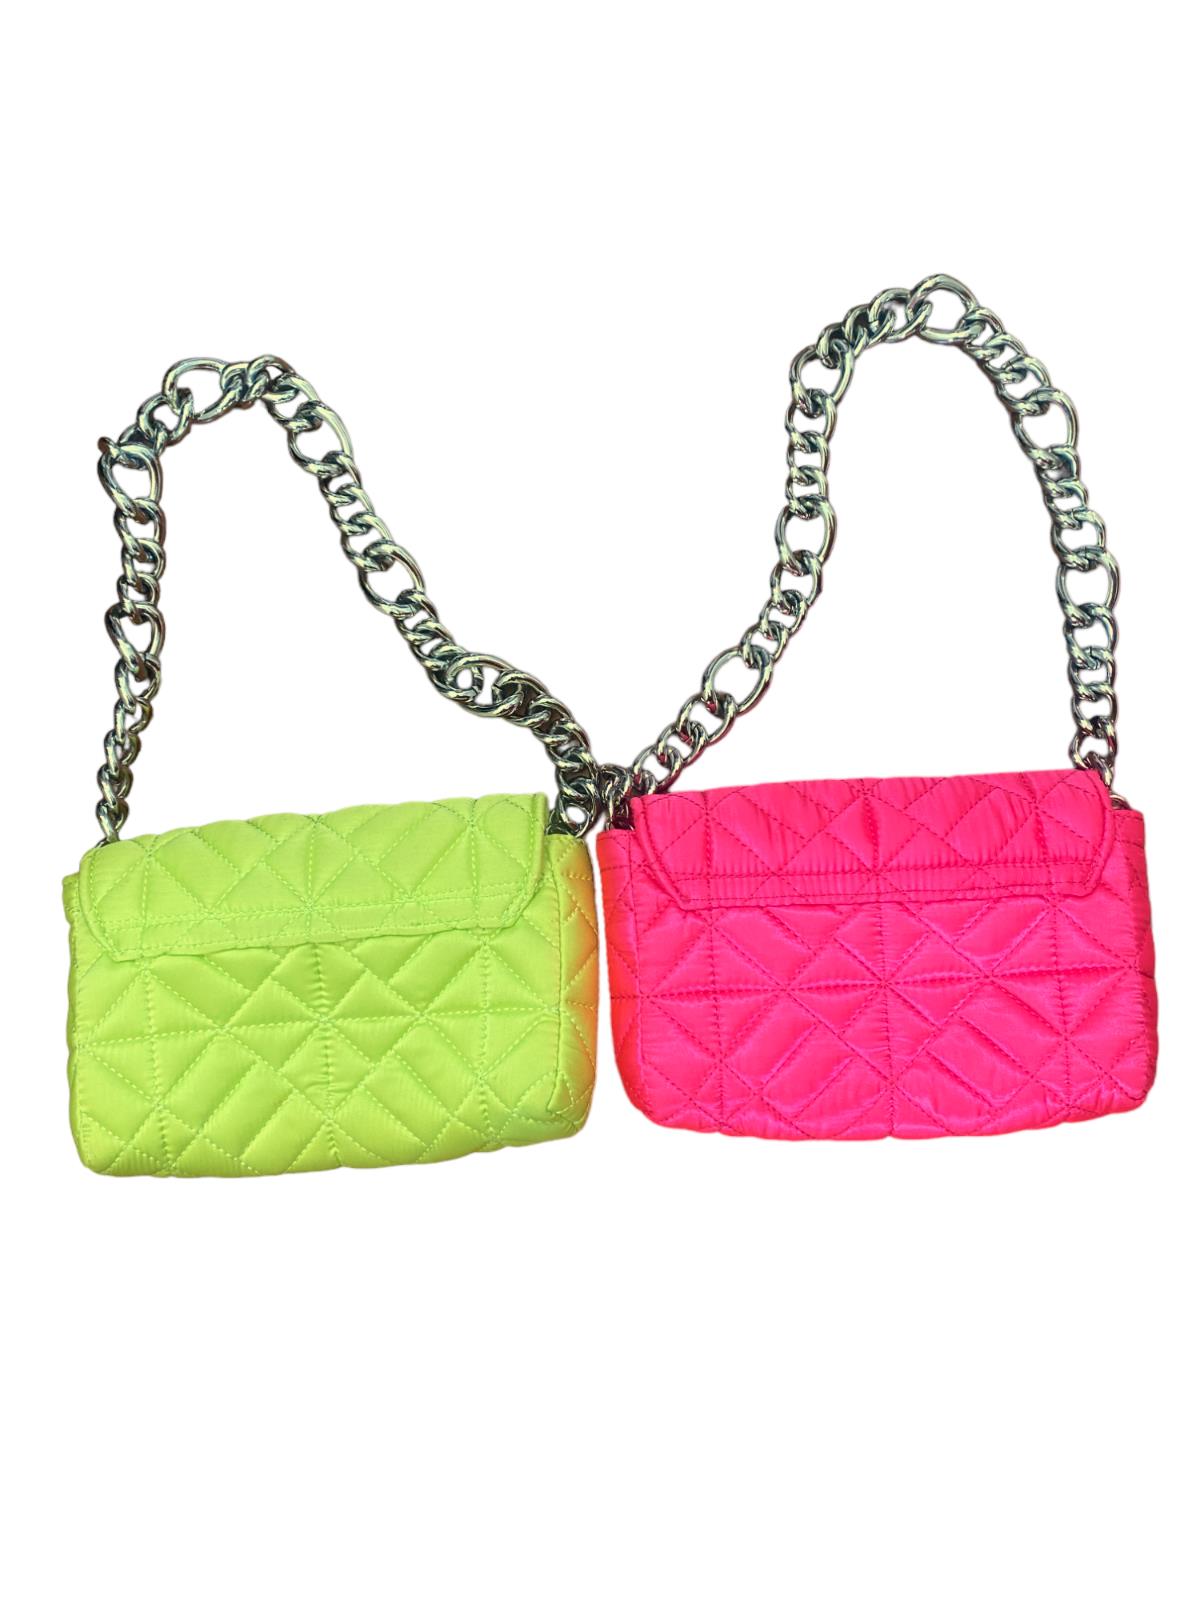 2 x ZARA Neon Quilted Handbags | Yellow & Pink, Fabric, Thick Silver Chain